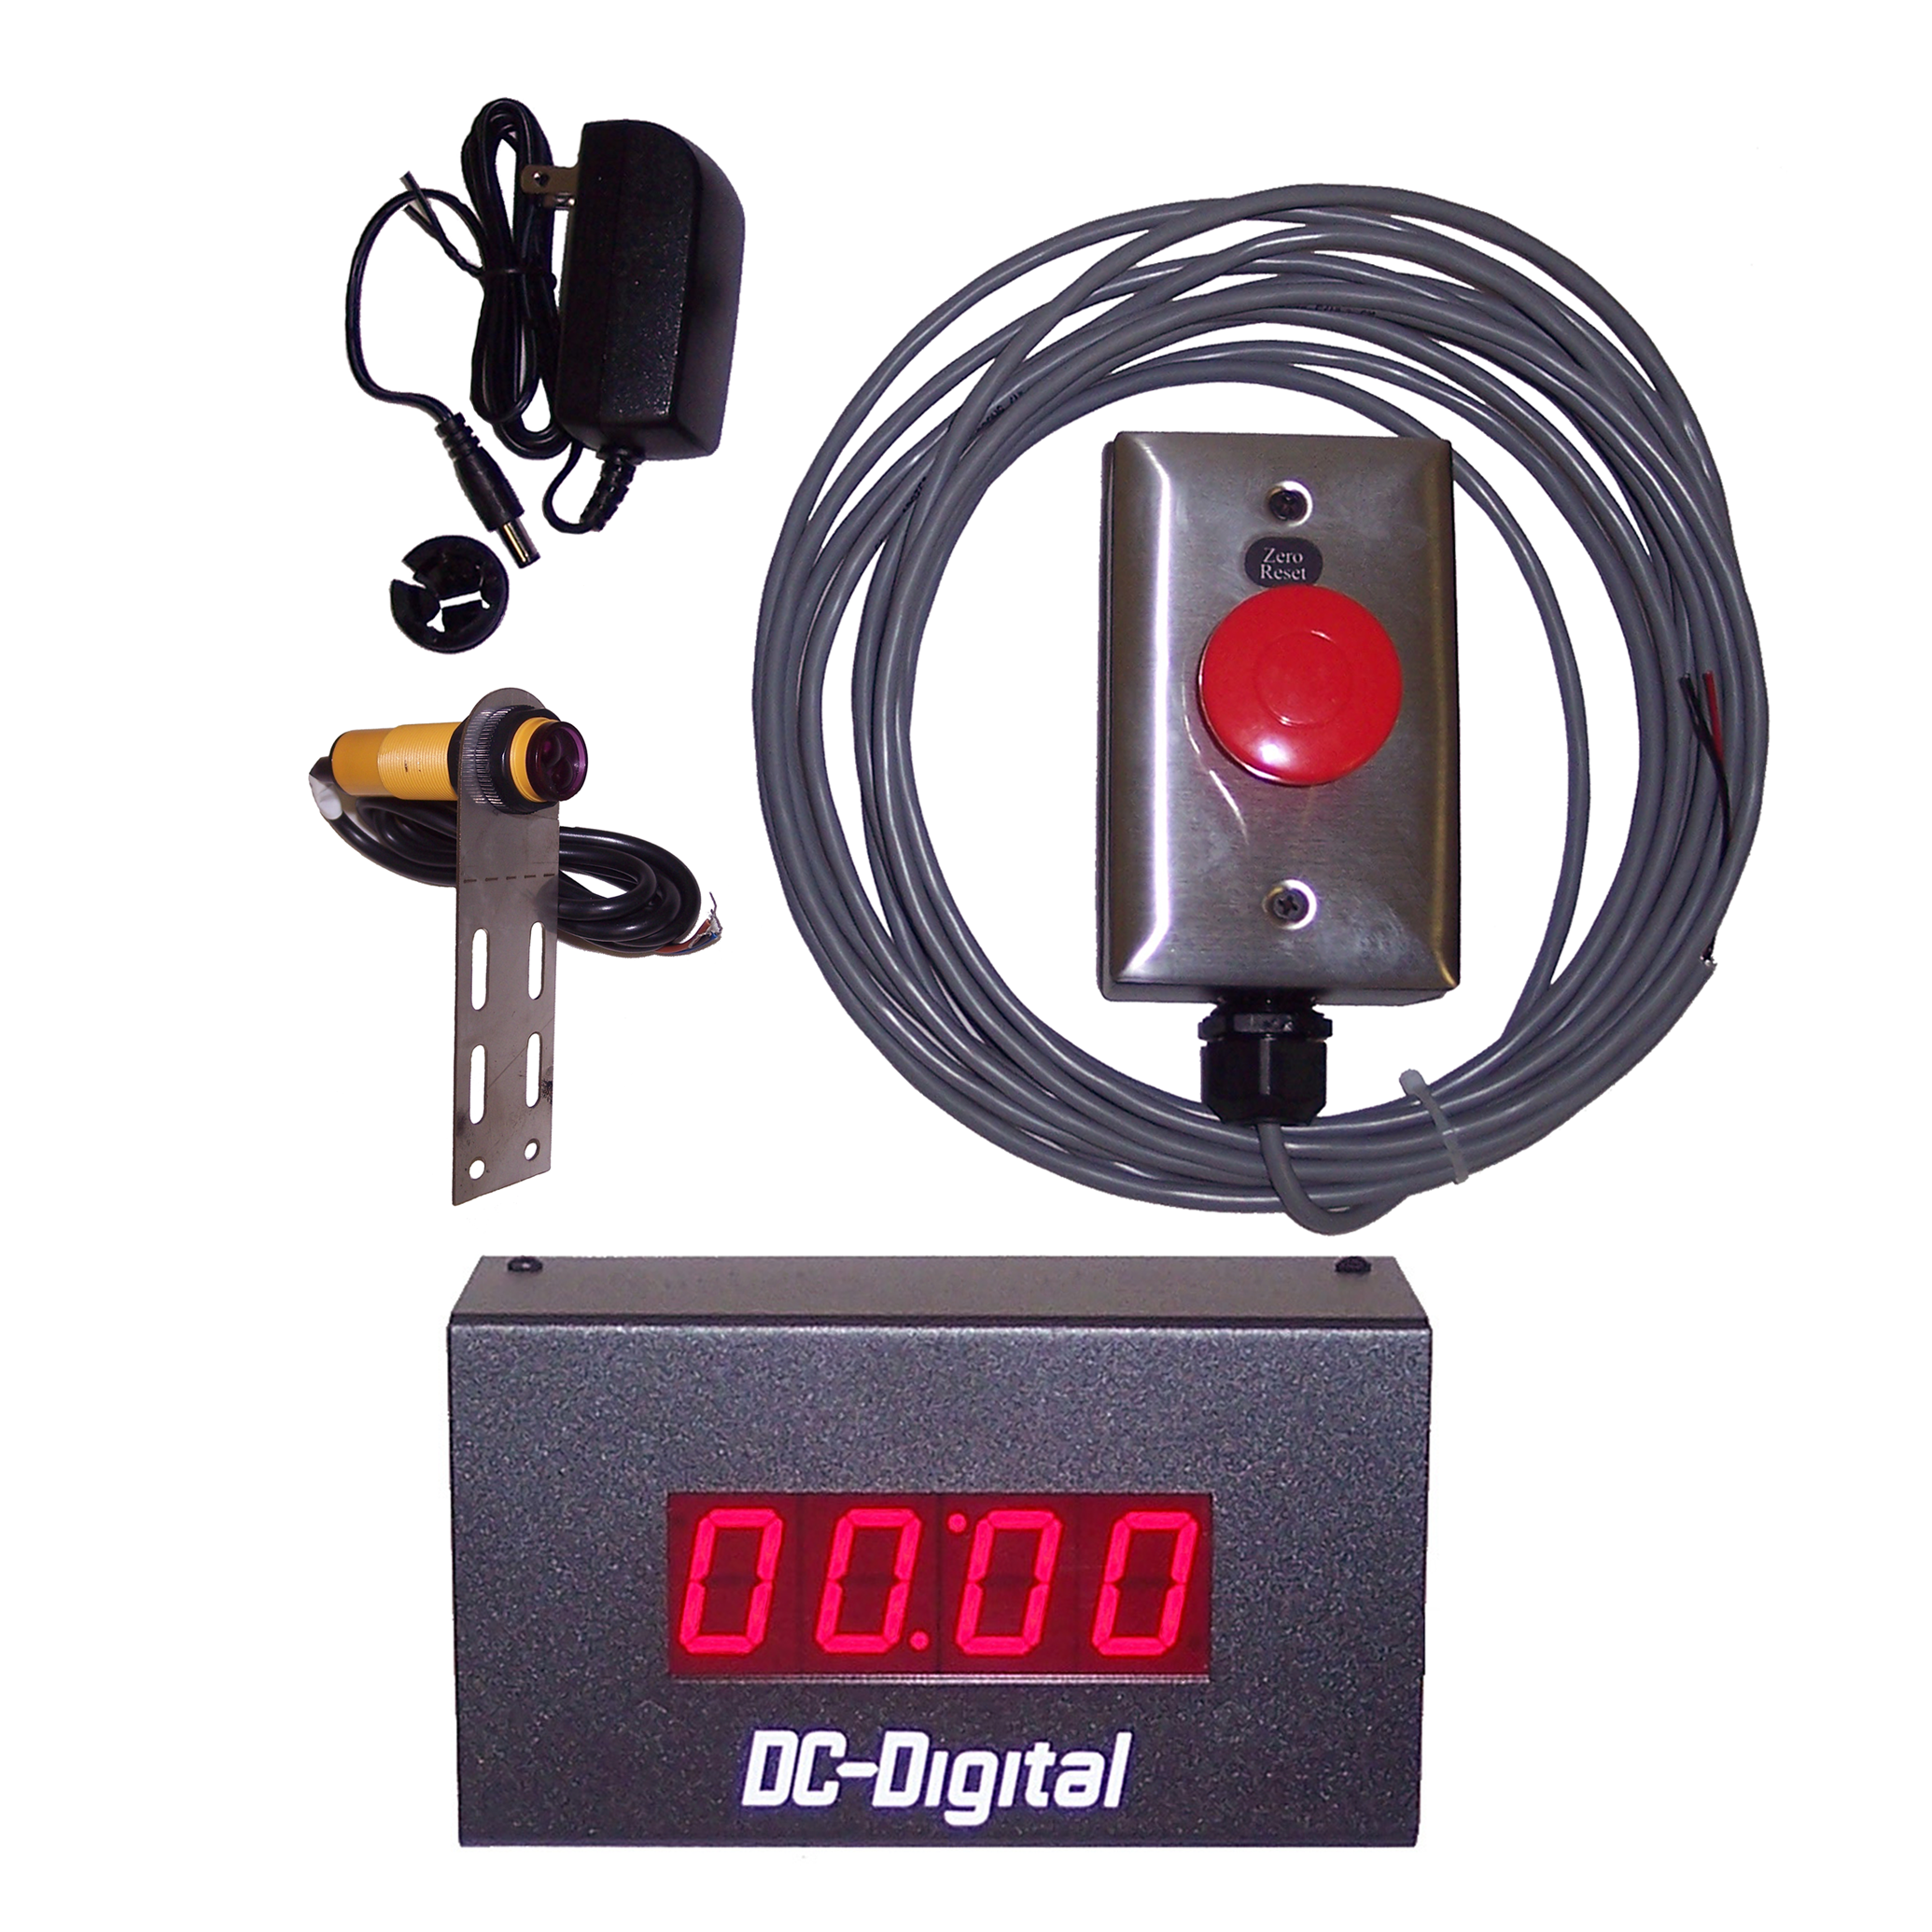 (DC-10T-UP-PKG-SHRT) 1 Inch LED Digital, Process Count Up Timer Package, Includes: Short Range Diffused Photo-Reflective Sensor and Mount (adj. to 10 Inches), 40mm Reset Palm Switch (J-Box, Stainless Cover, 25ft. Cabling) and Power Supply "Ships FREE !"